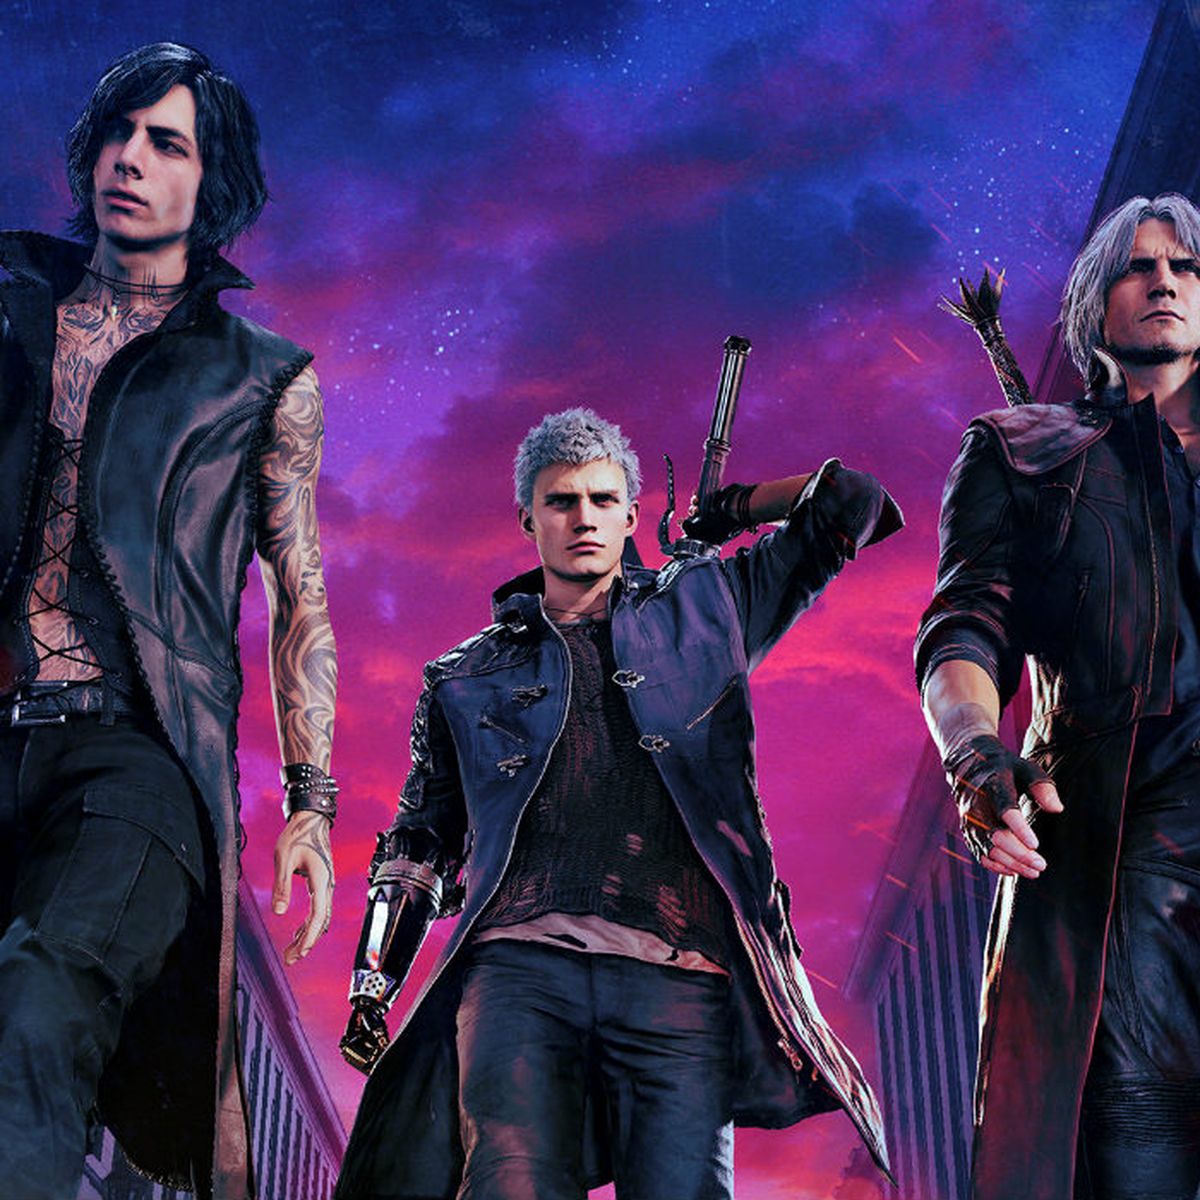 Análise] Devil May Cry 5: Special Edition [PS5] - GameForces